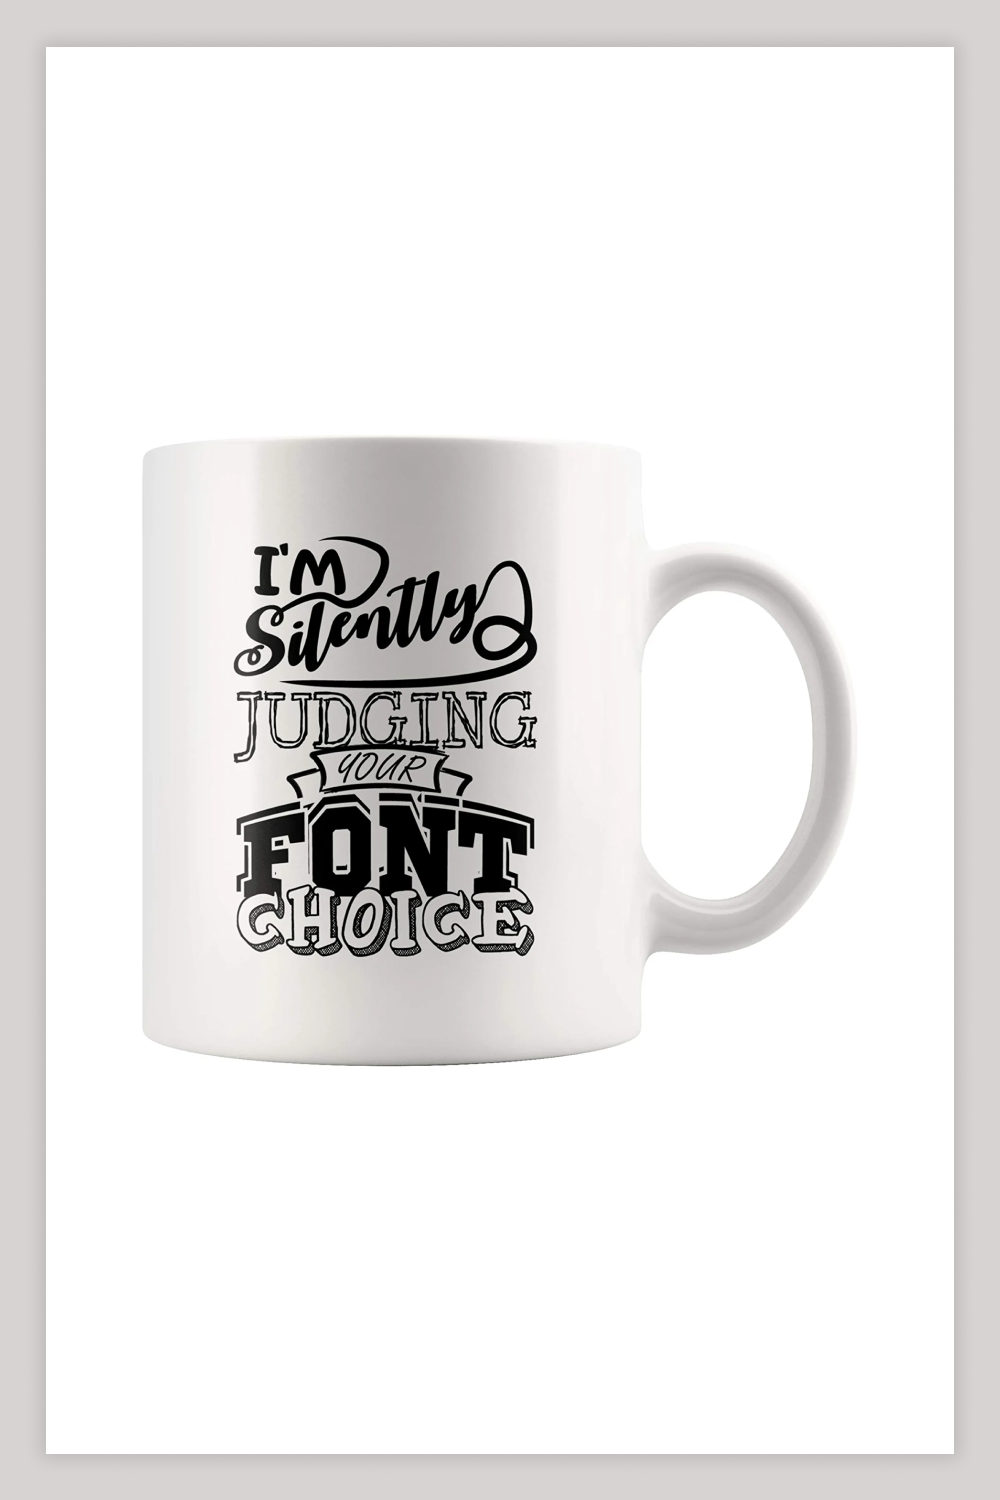 White mug with text I'm Silently Judging your Font Choice.